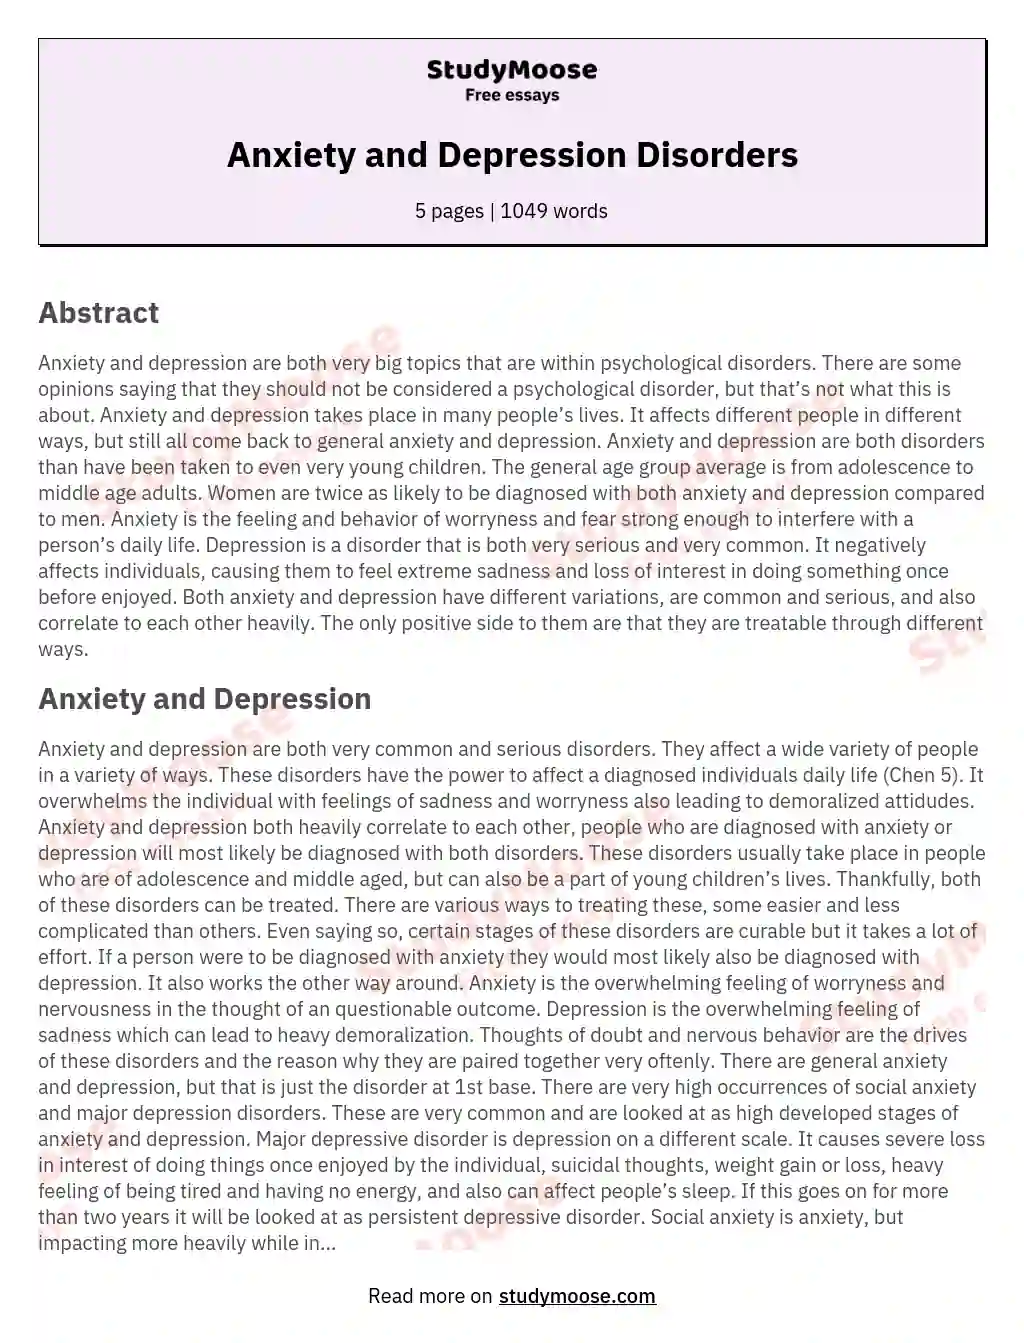 depression and anxiety essays